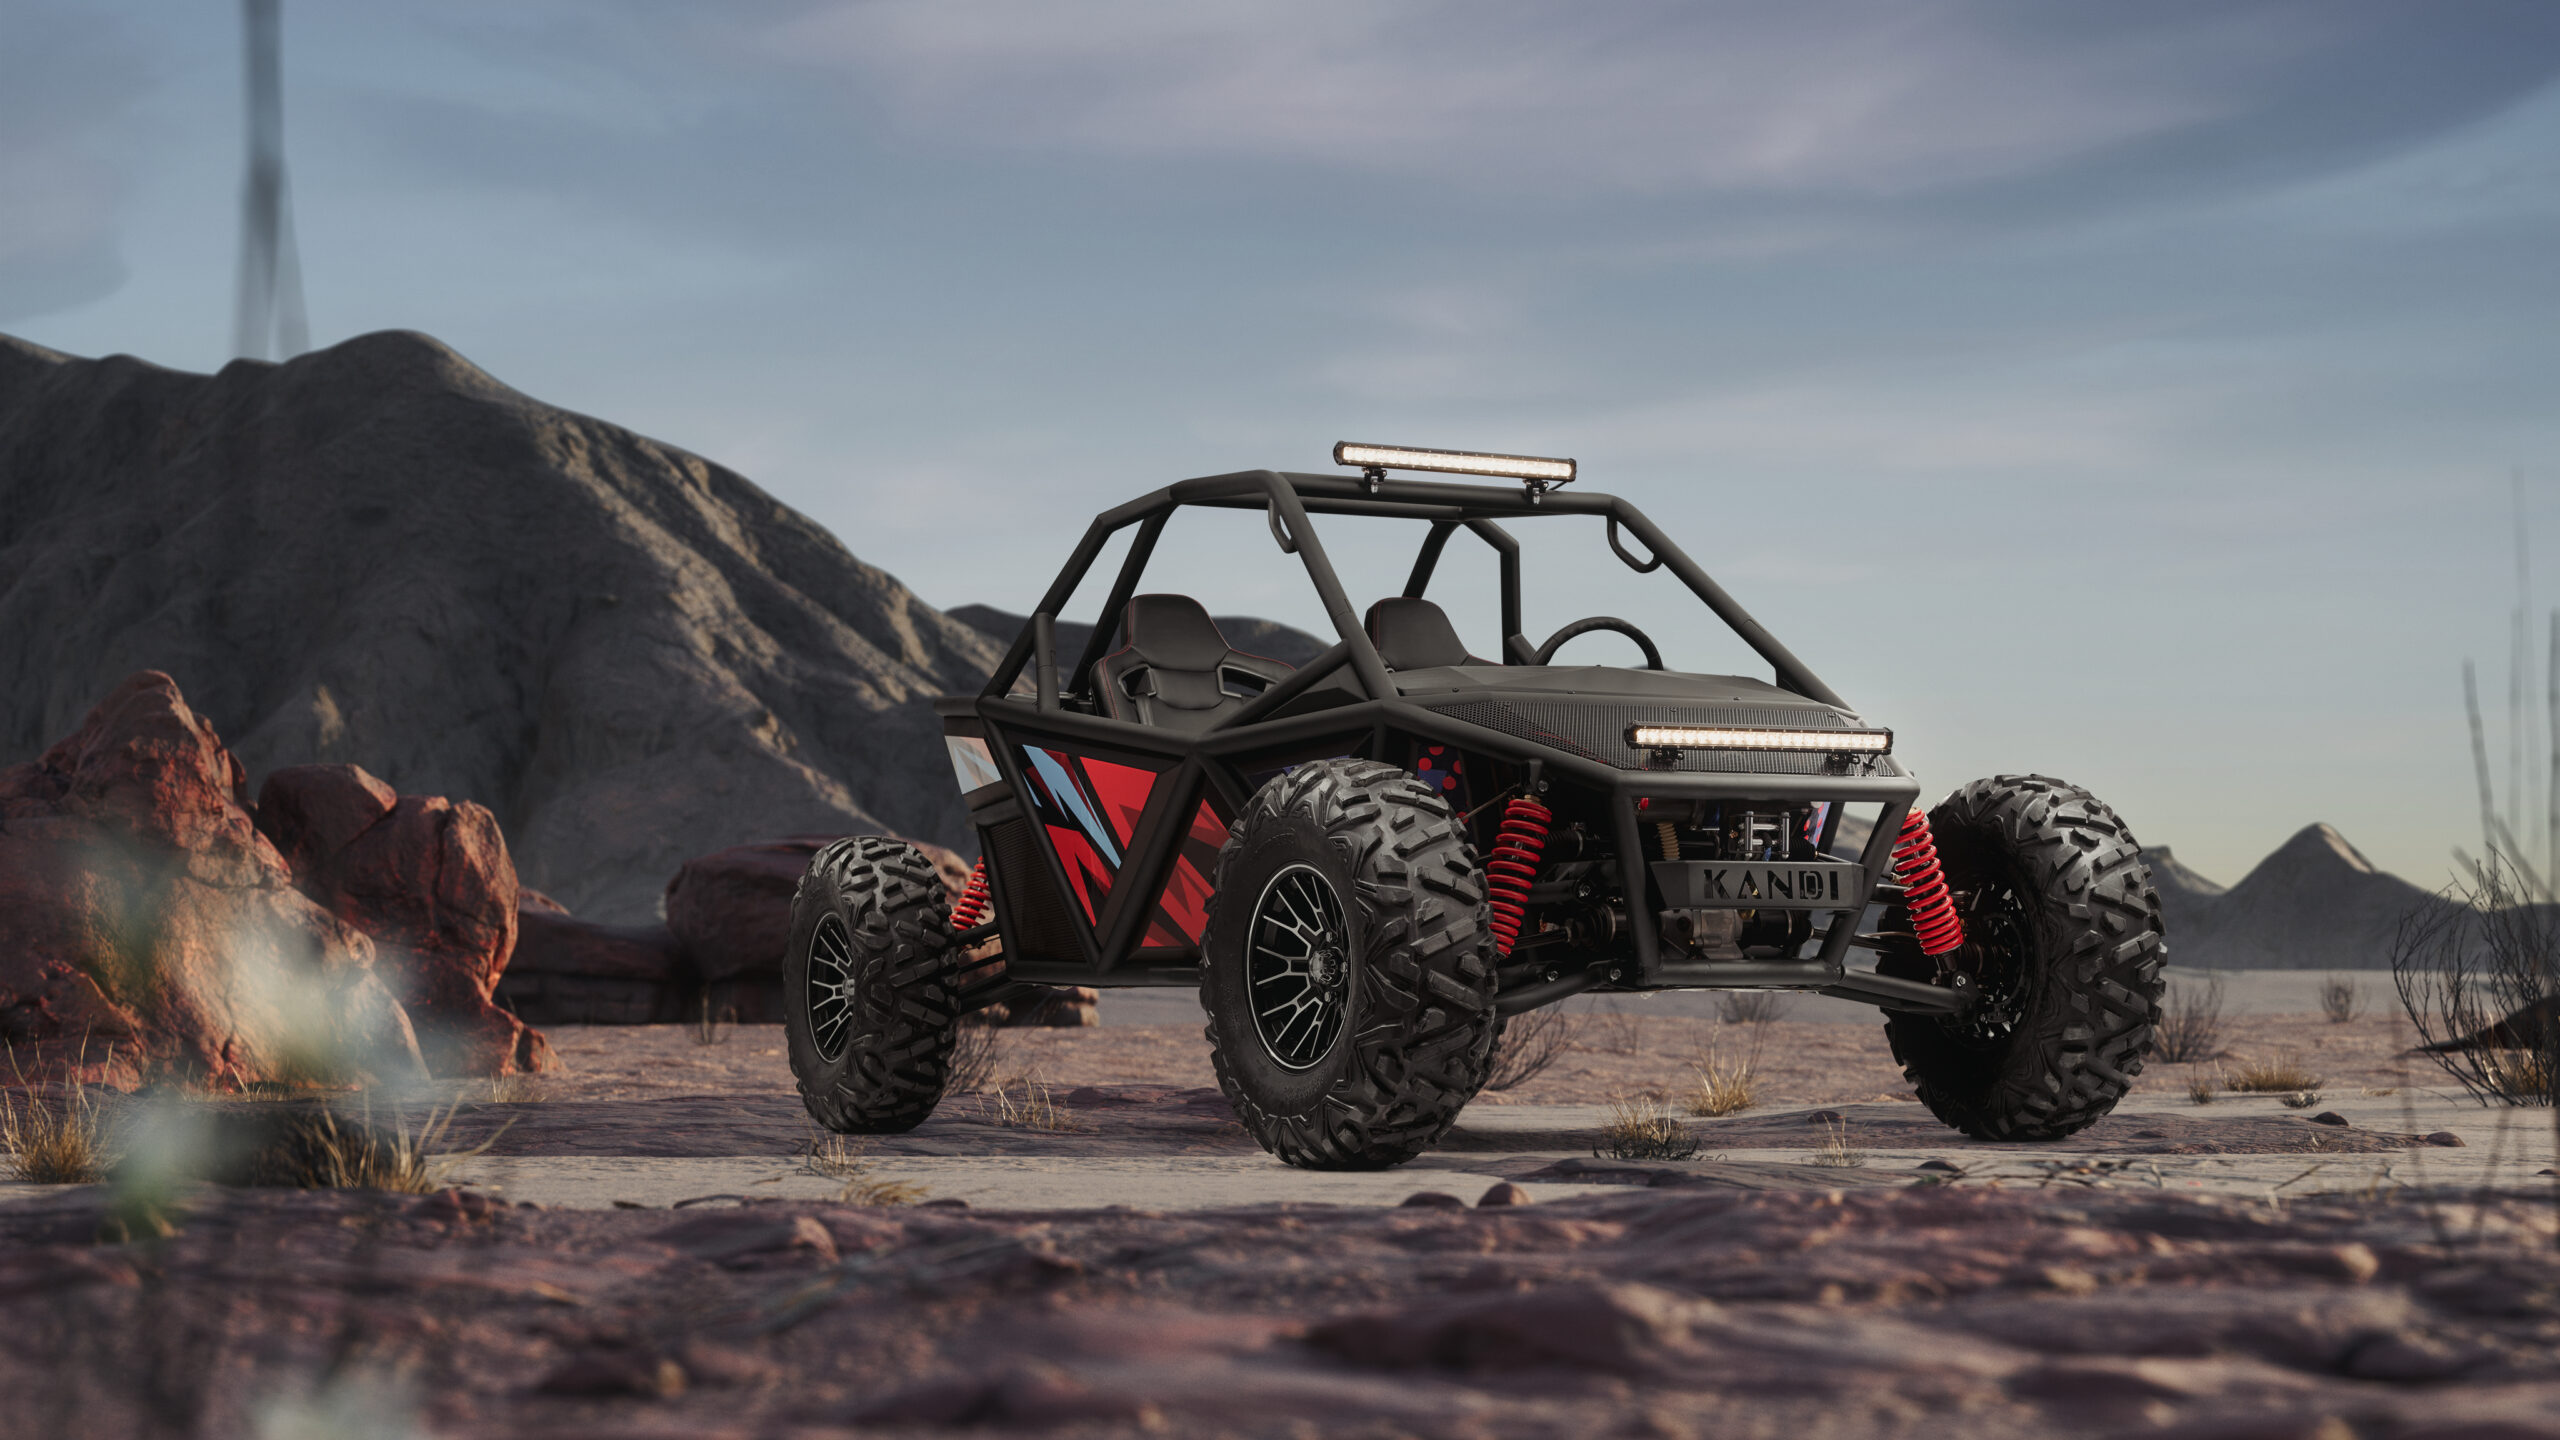 A photograph of the Kandi Dune Buggy sitting in a desert environment.